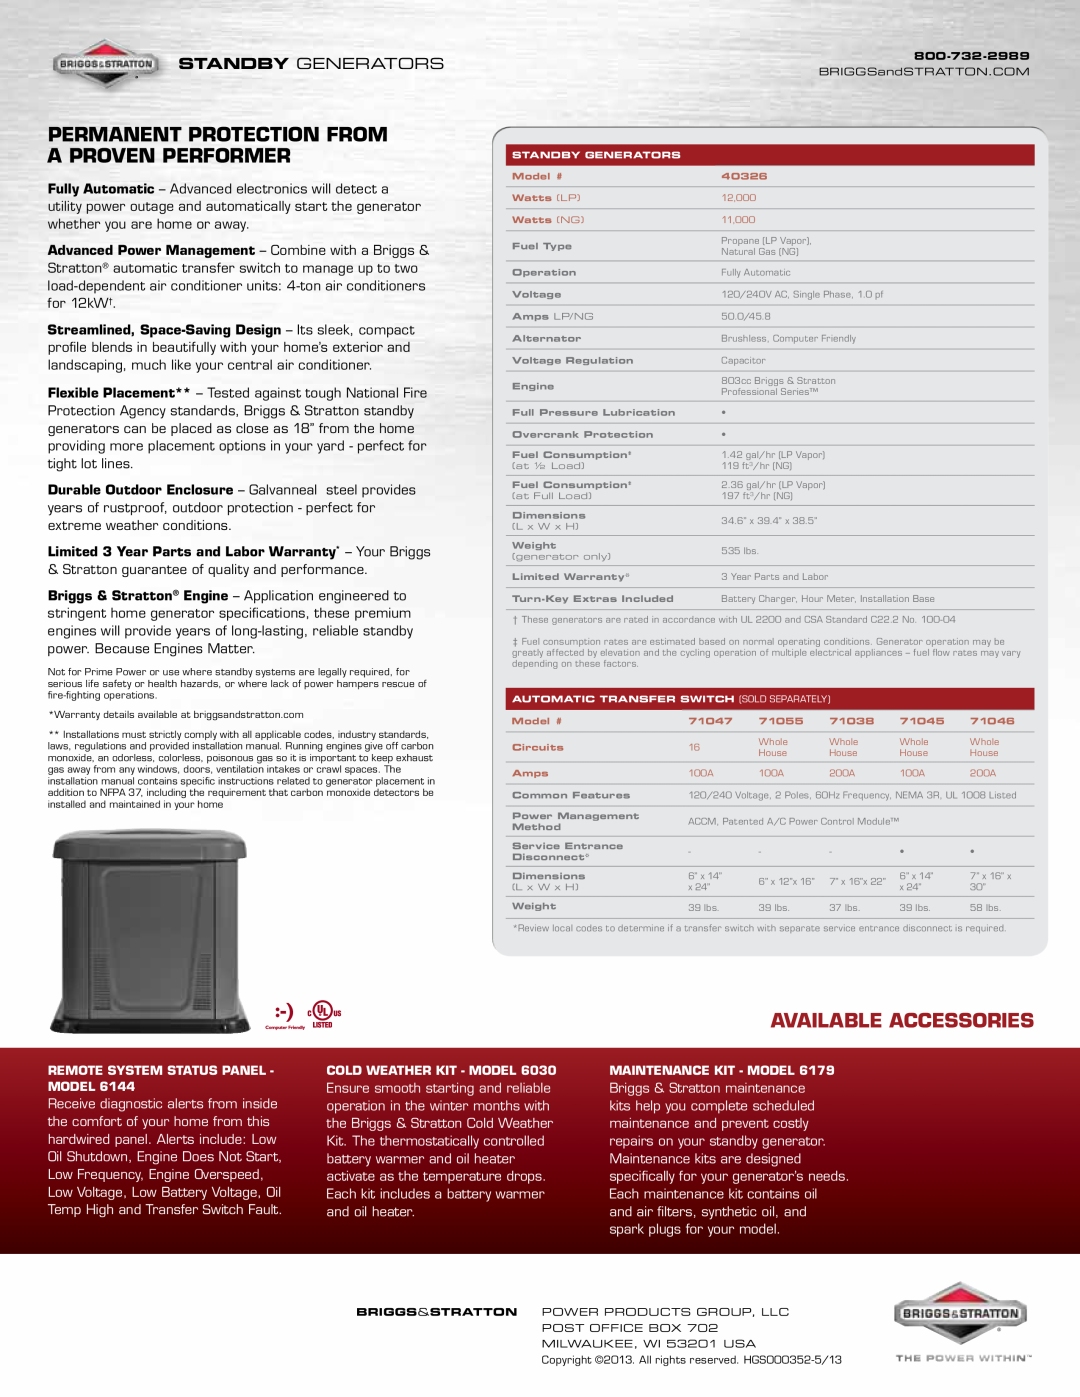 Briggs & Stratton 6144 manual Permanent protection from a proven performer, Available Accessories, STANDBY Generators 